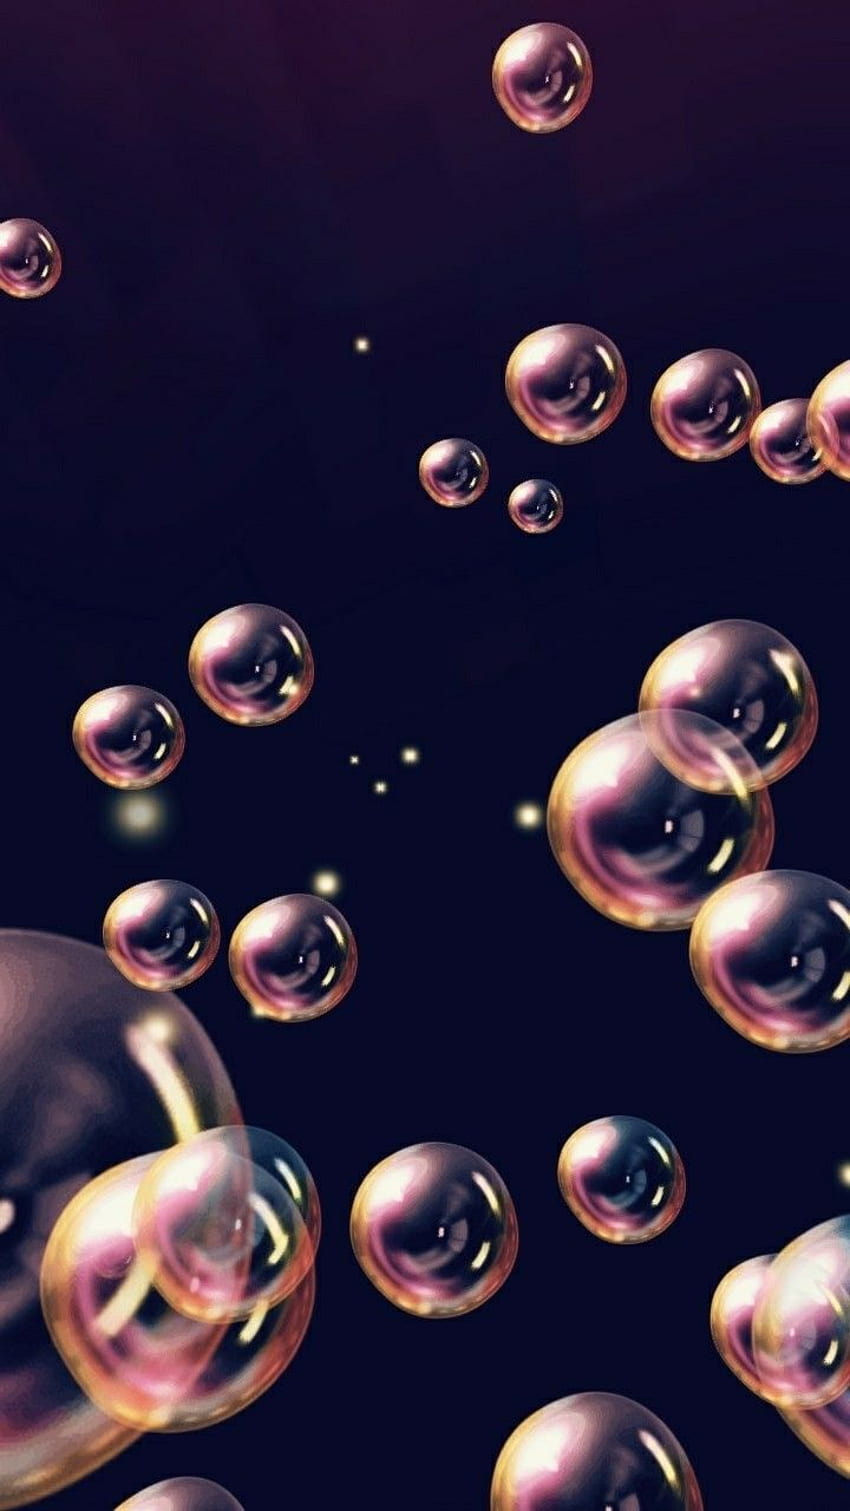 Обои iPhone wallpapers  Bubbles wallpaper Android wallpaper Best iphone  wallpapers